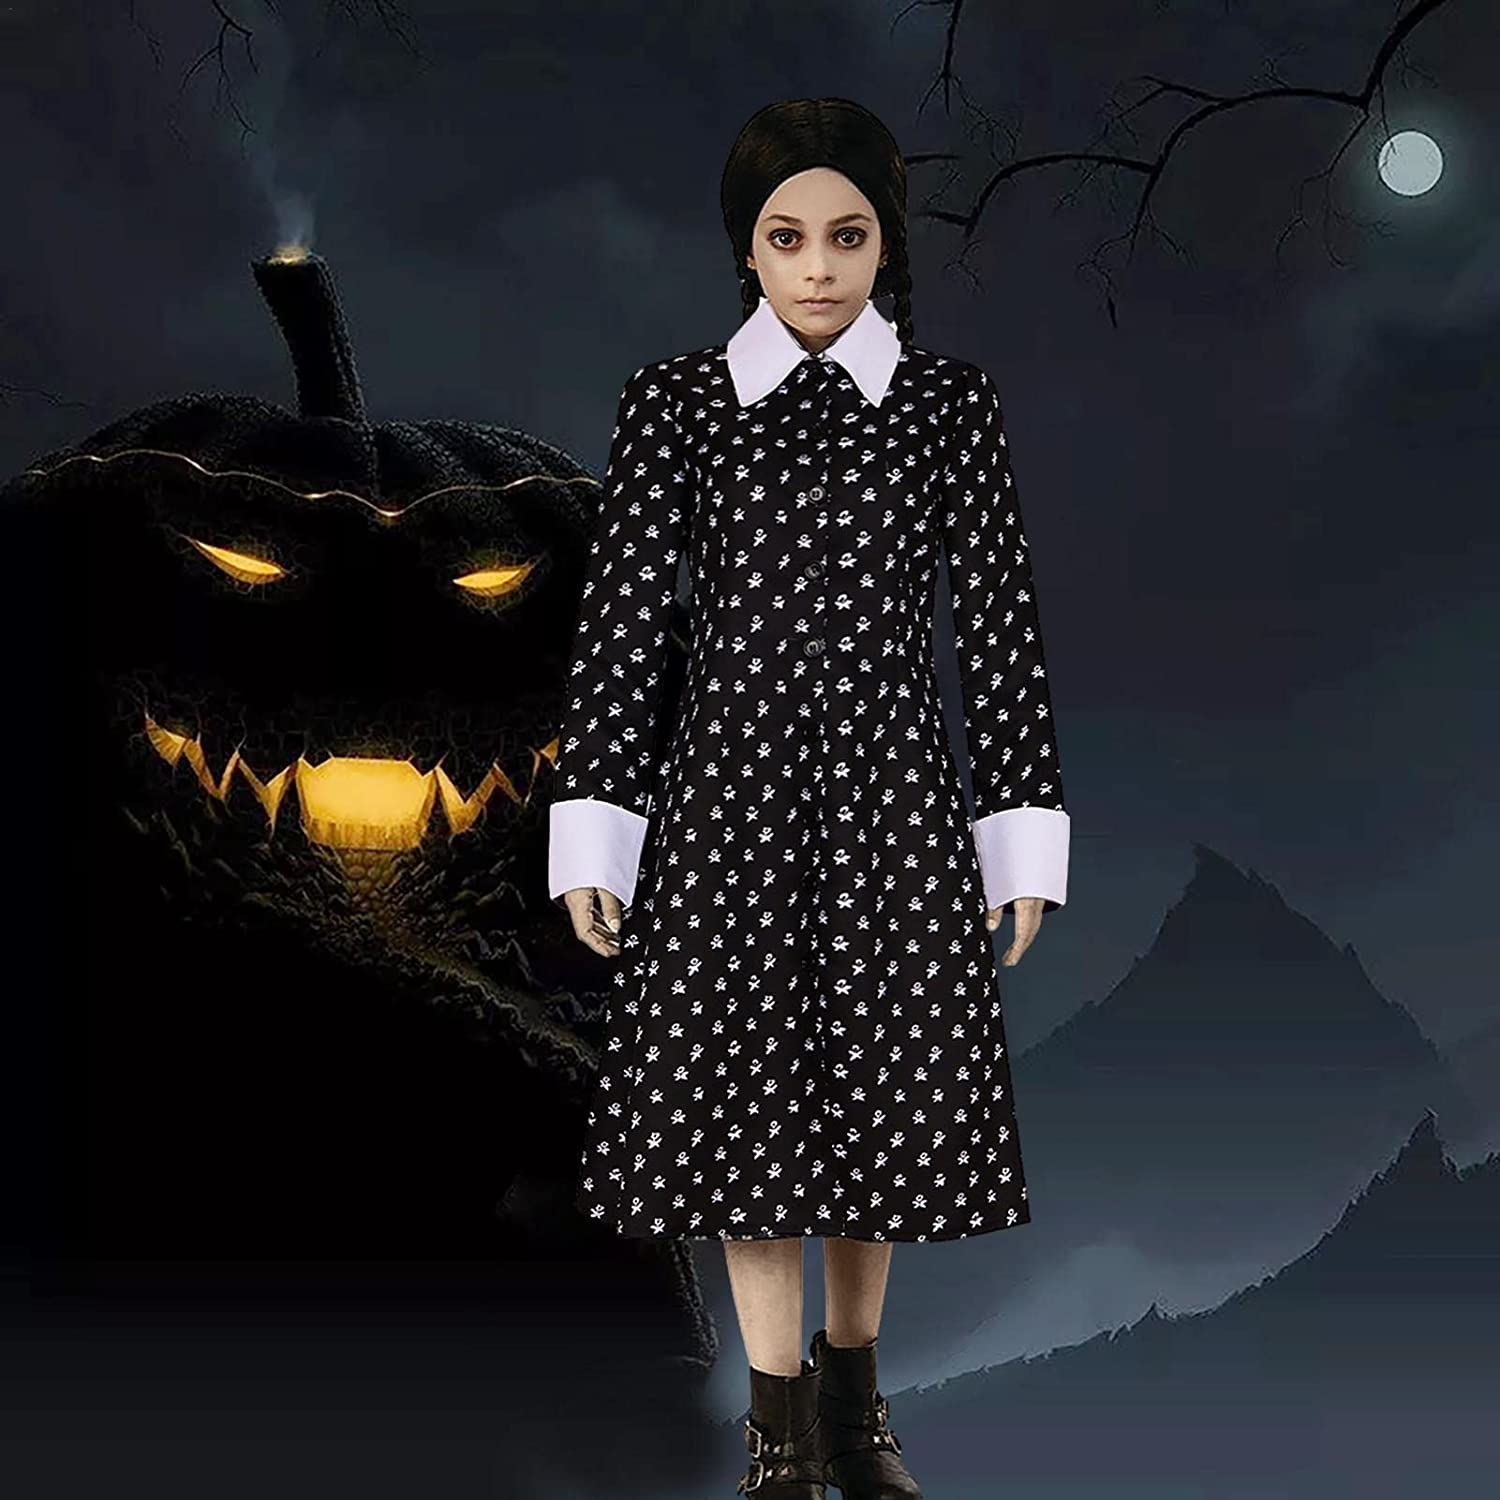 robe imprimee noire et blanche wenesday addams family enfant